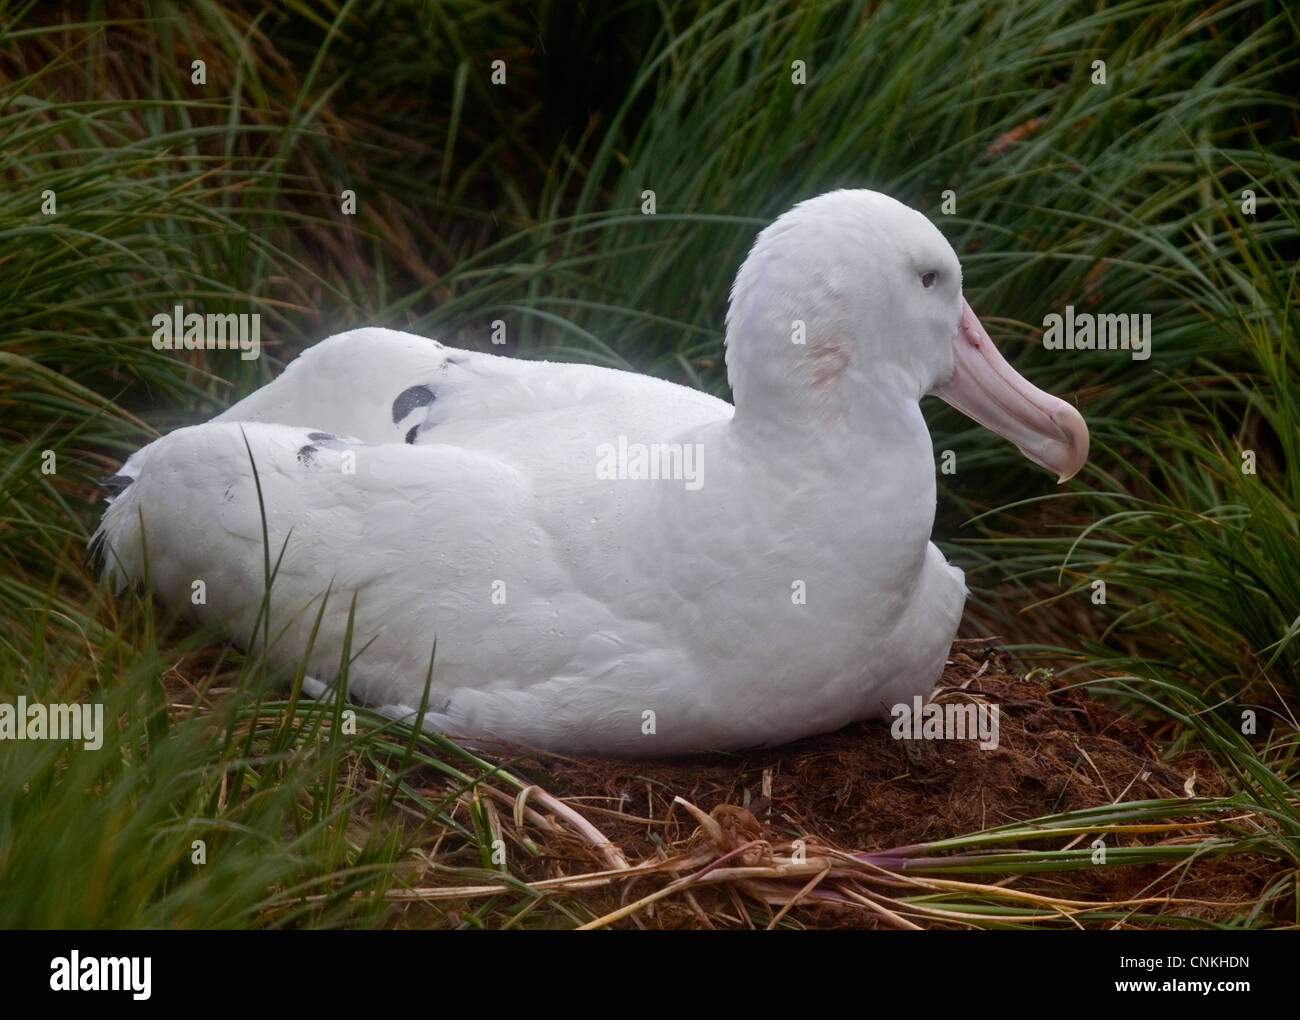 Wandering Albatross (diomedea exulans exulans) on nest, Prion Island, South Georgia Stock Photo